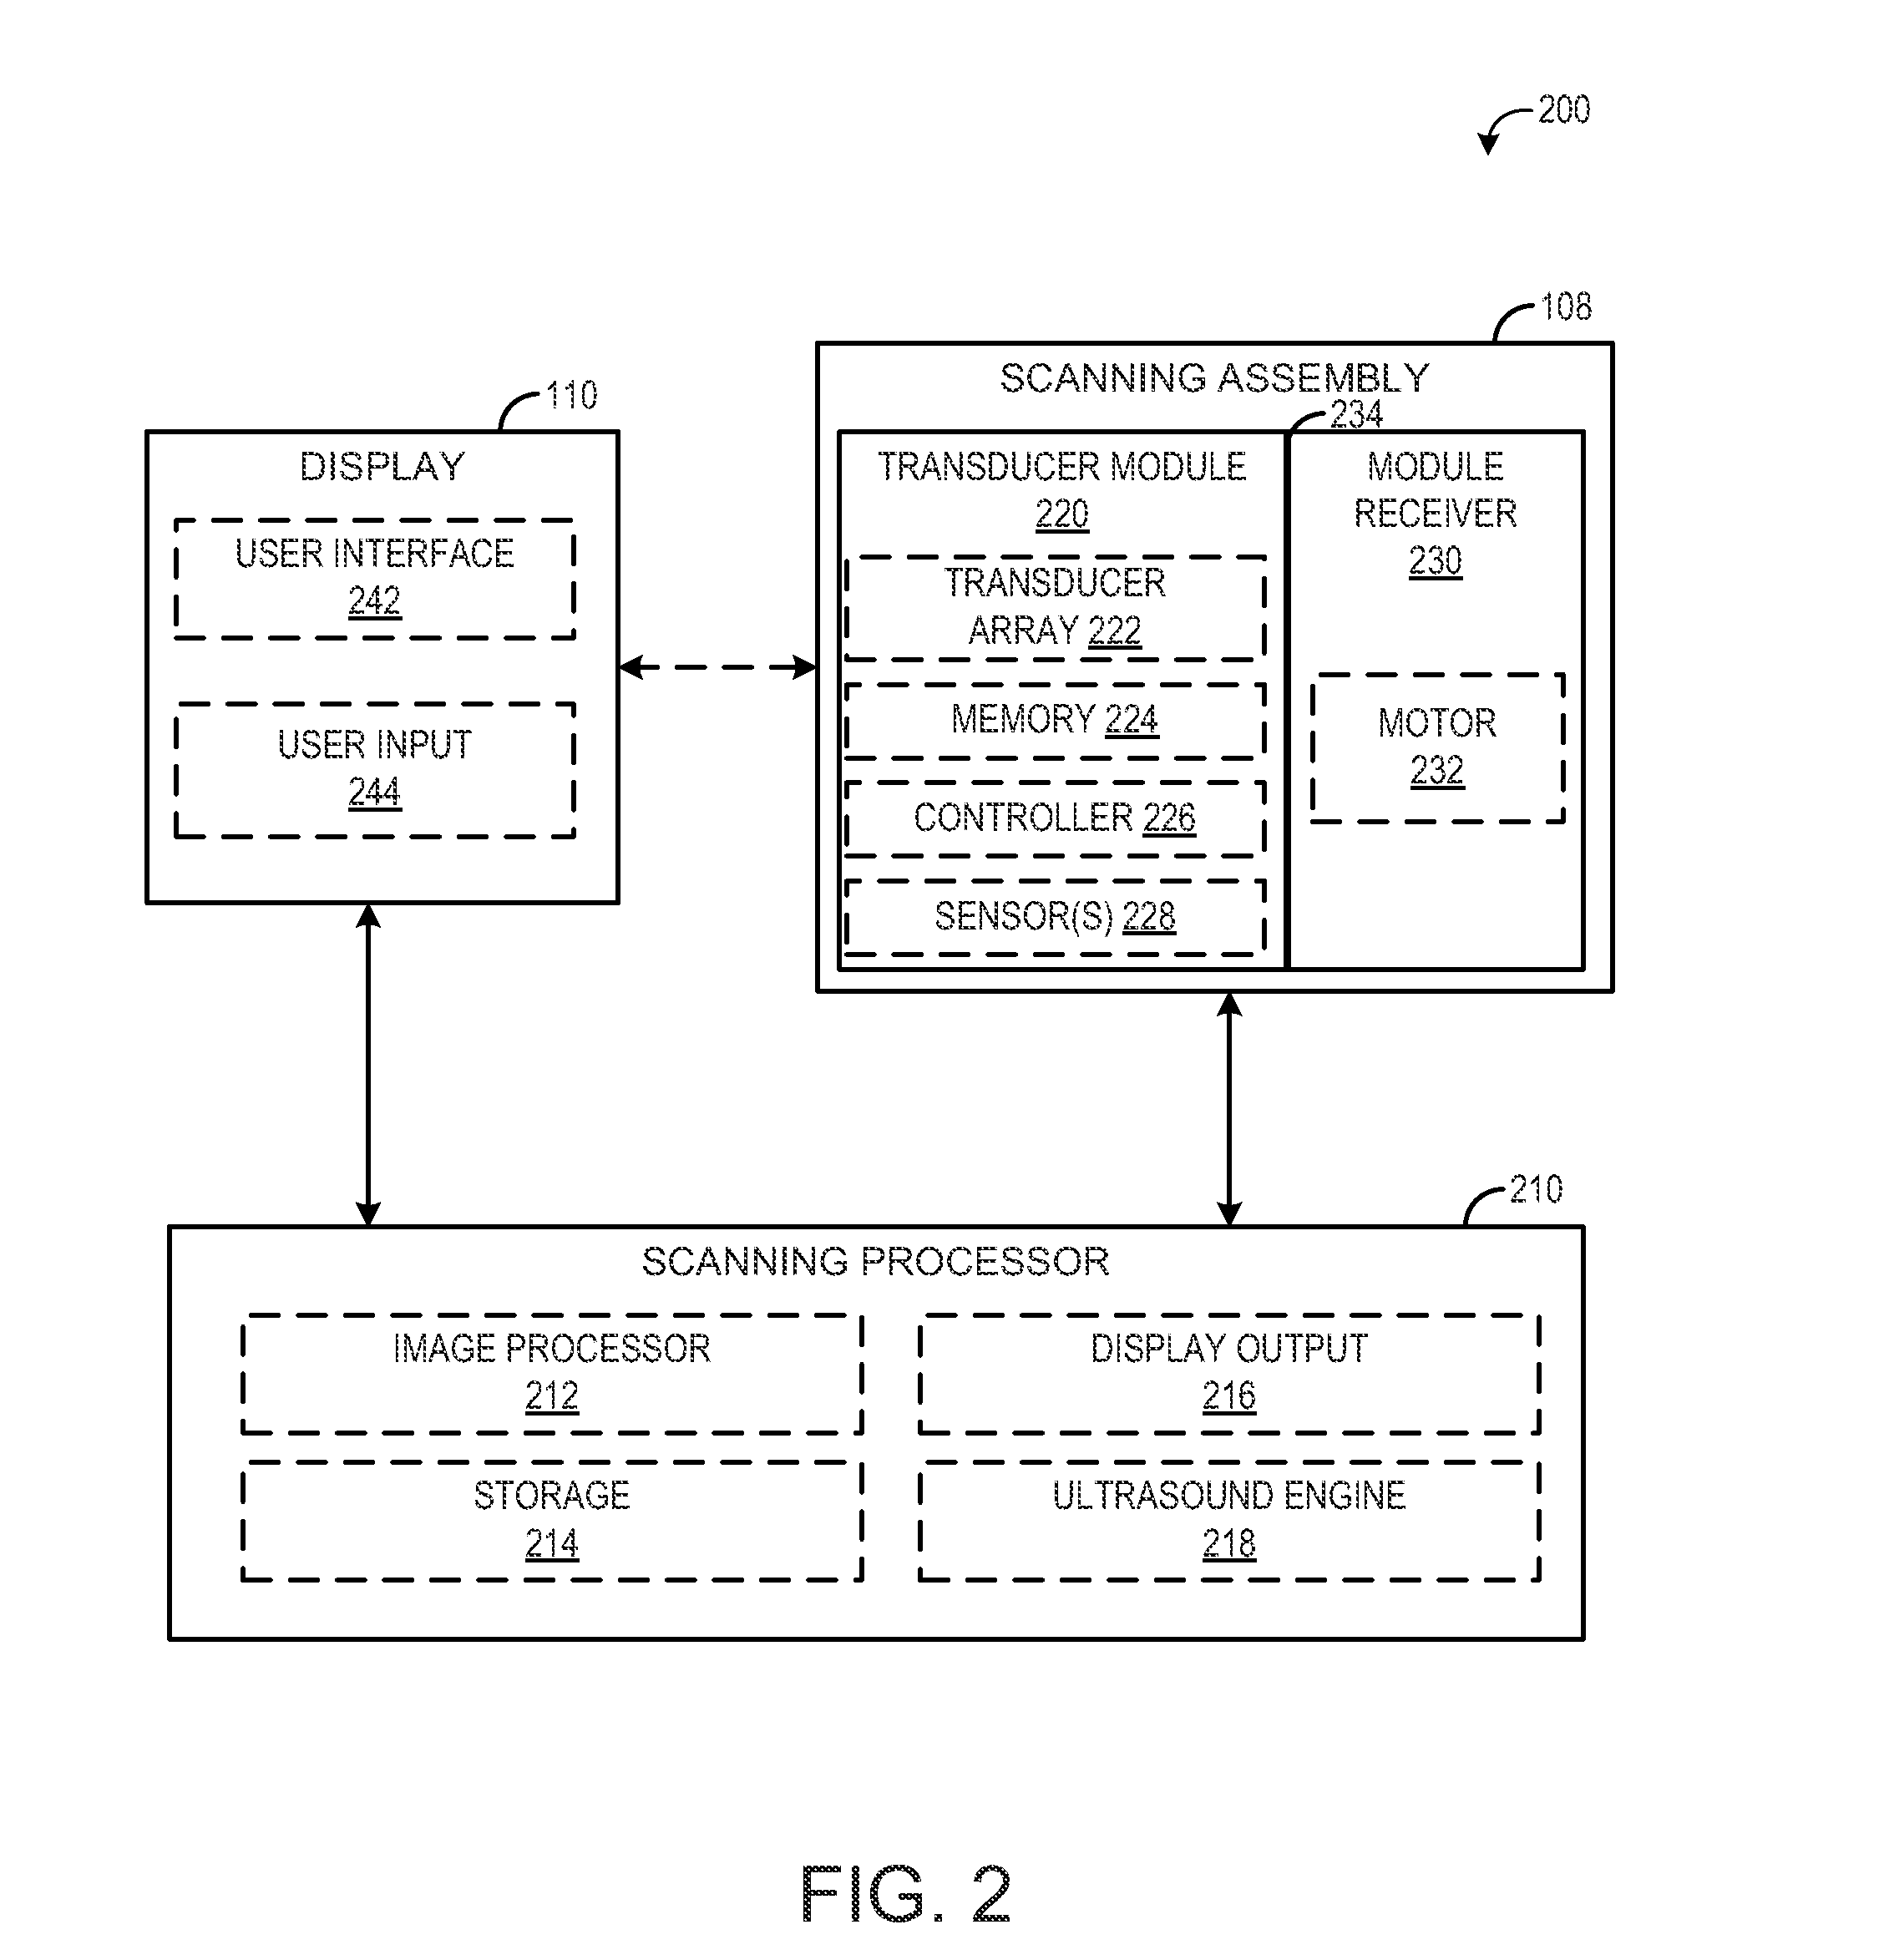 Method and systems for a removable transducer with memory of an automated breast ultrasound system